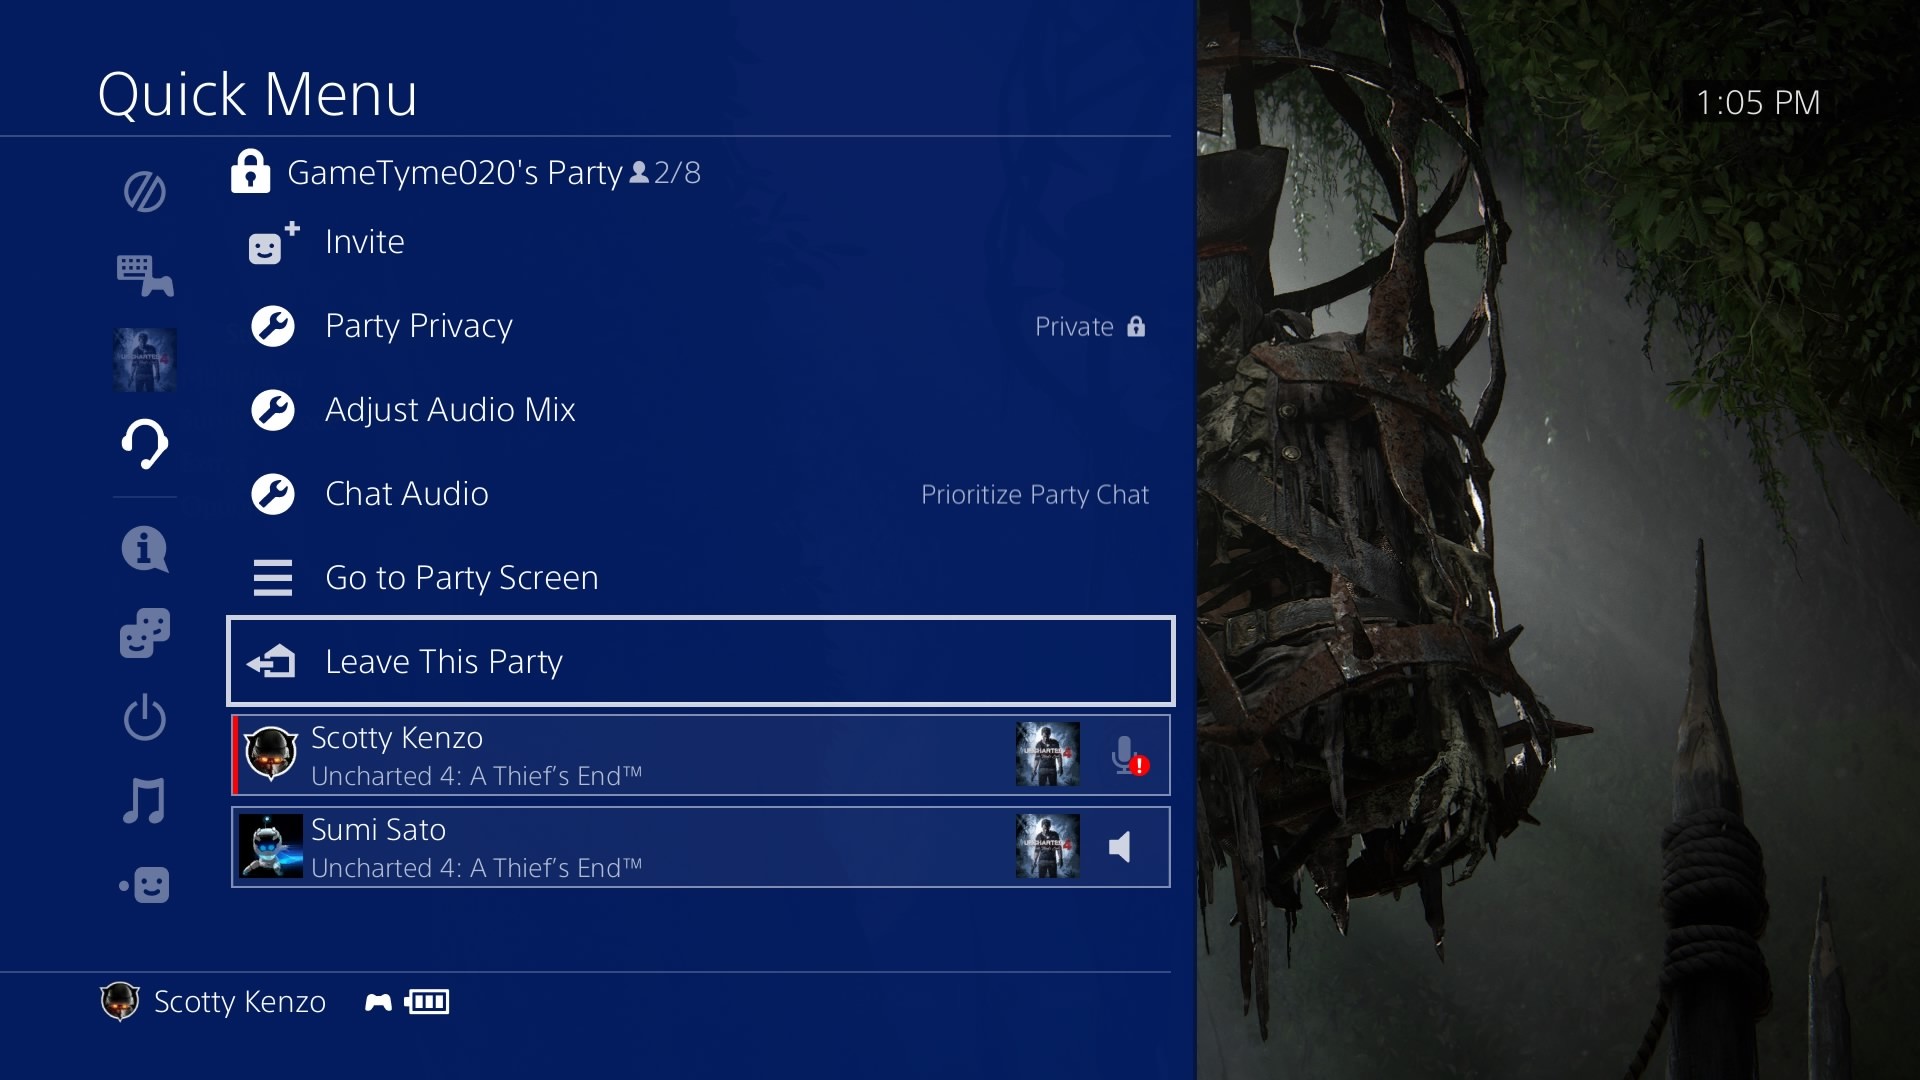 update file for reinstallation ps4 6.20